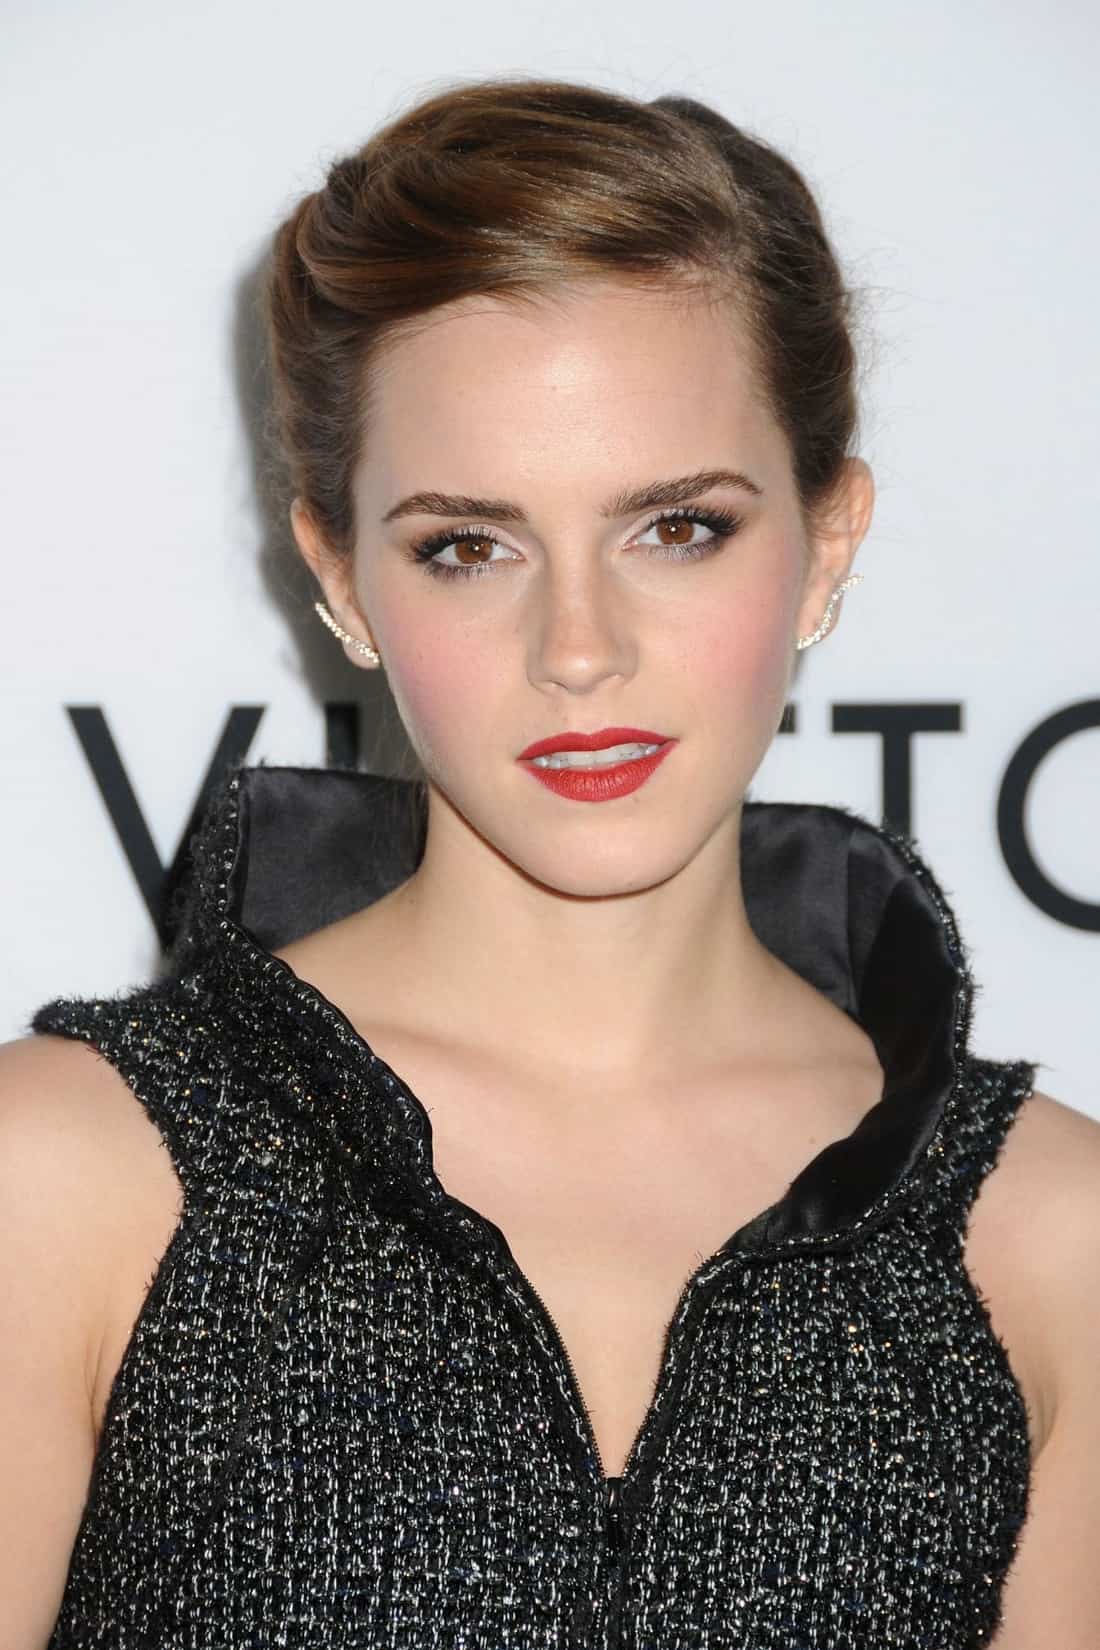 Emma Watson in a Black Zipper Mini Dress at the "The Bling Ring" Premiere